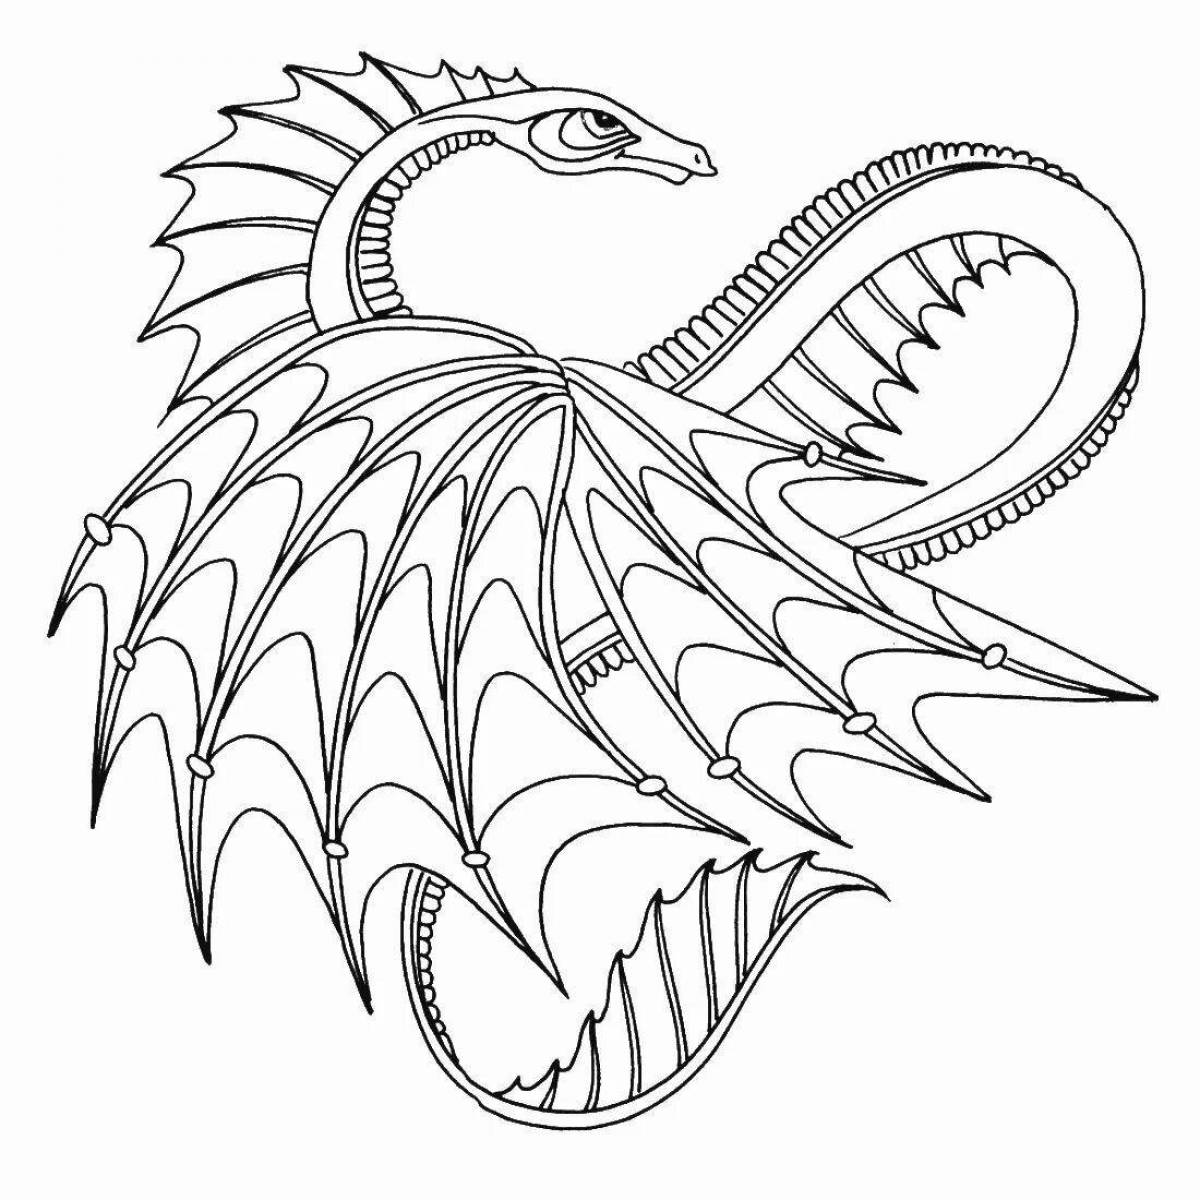 Glorious water dragon coloring page